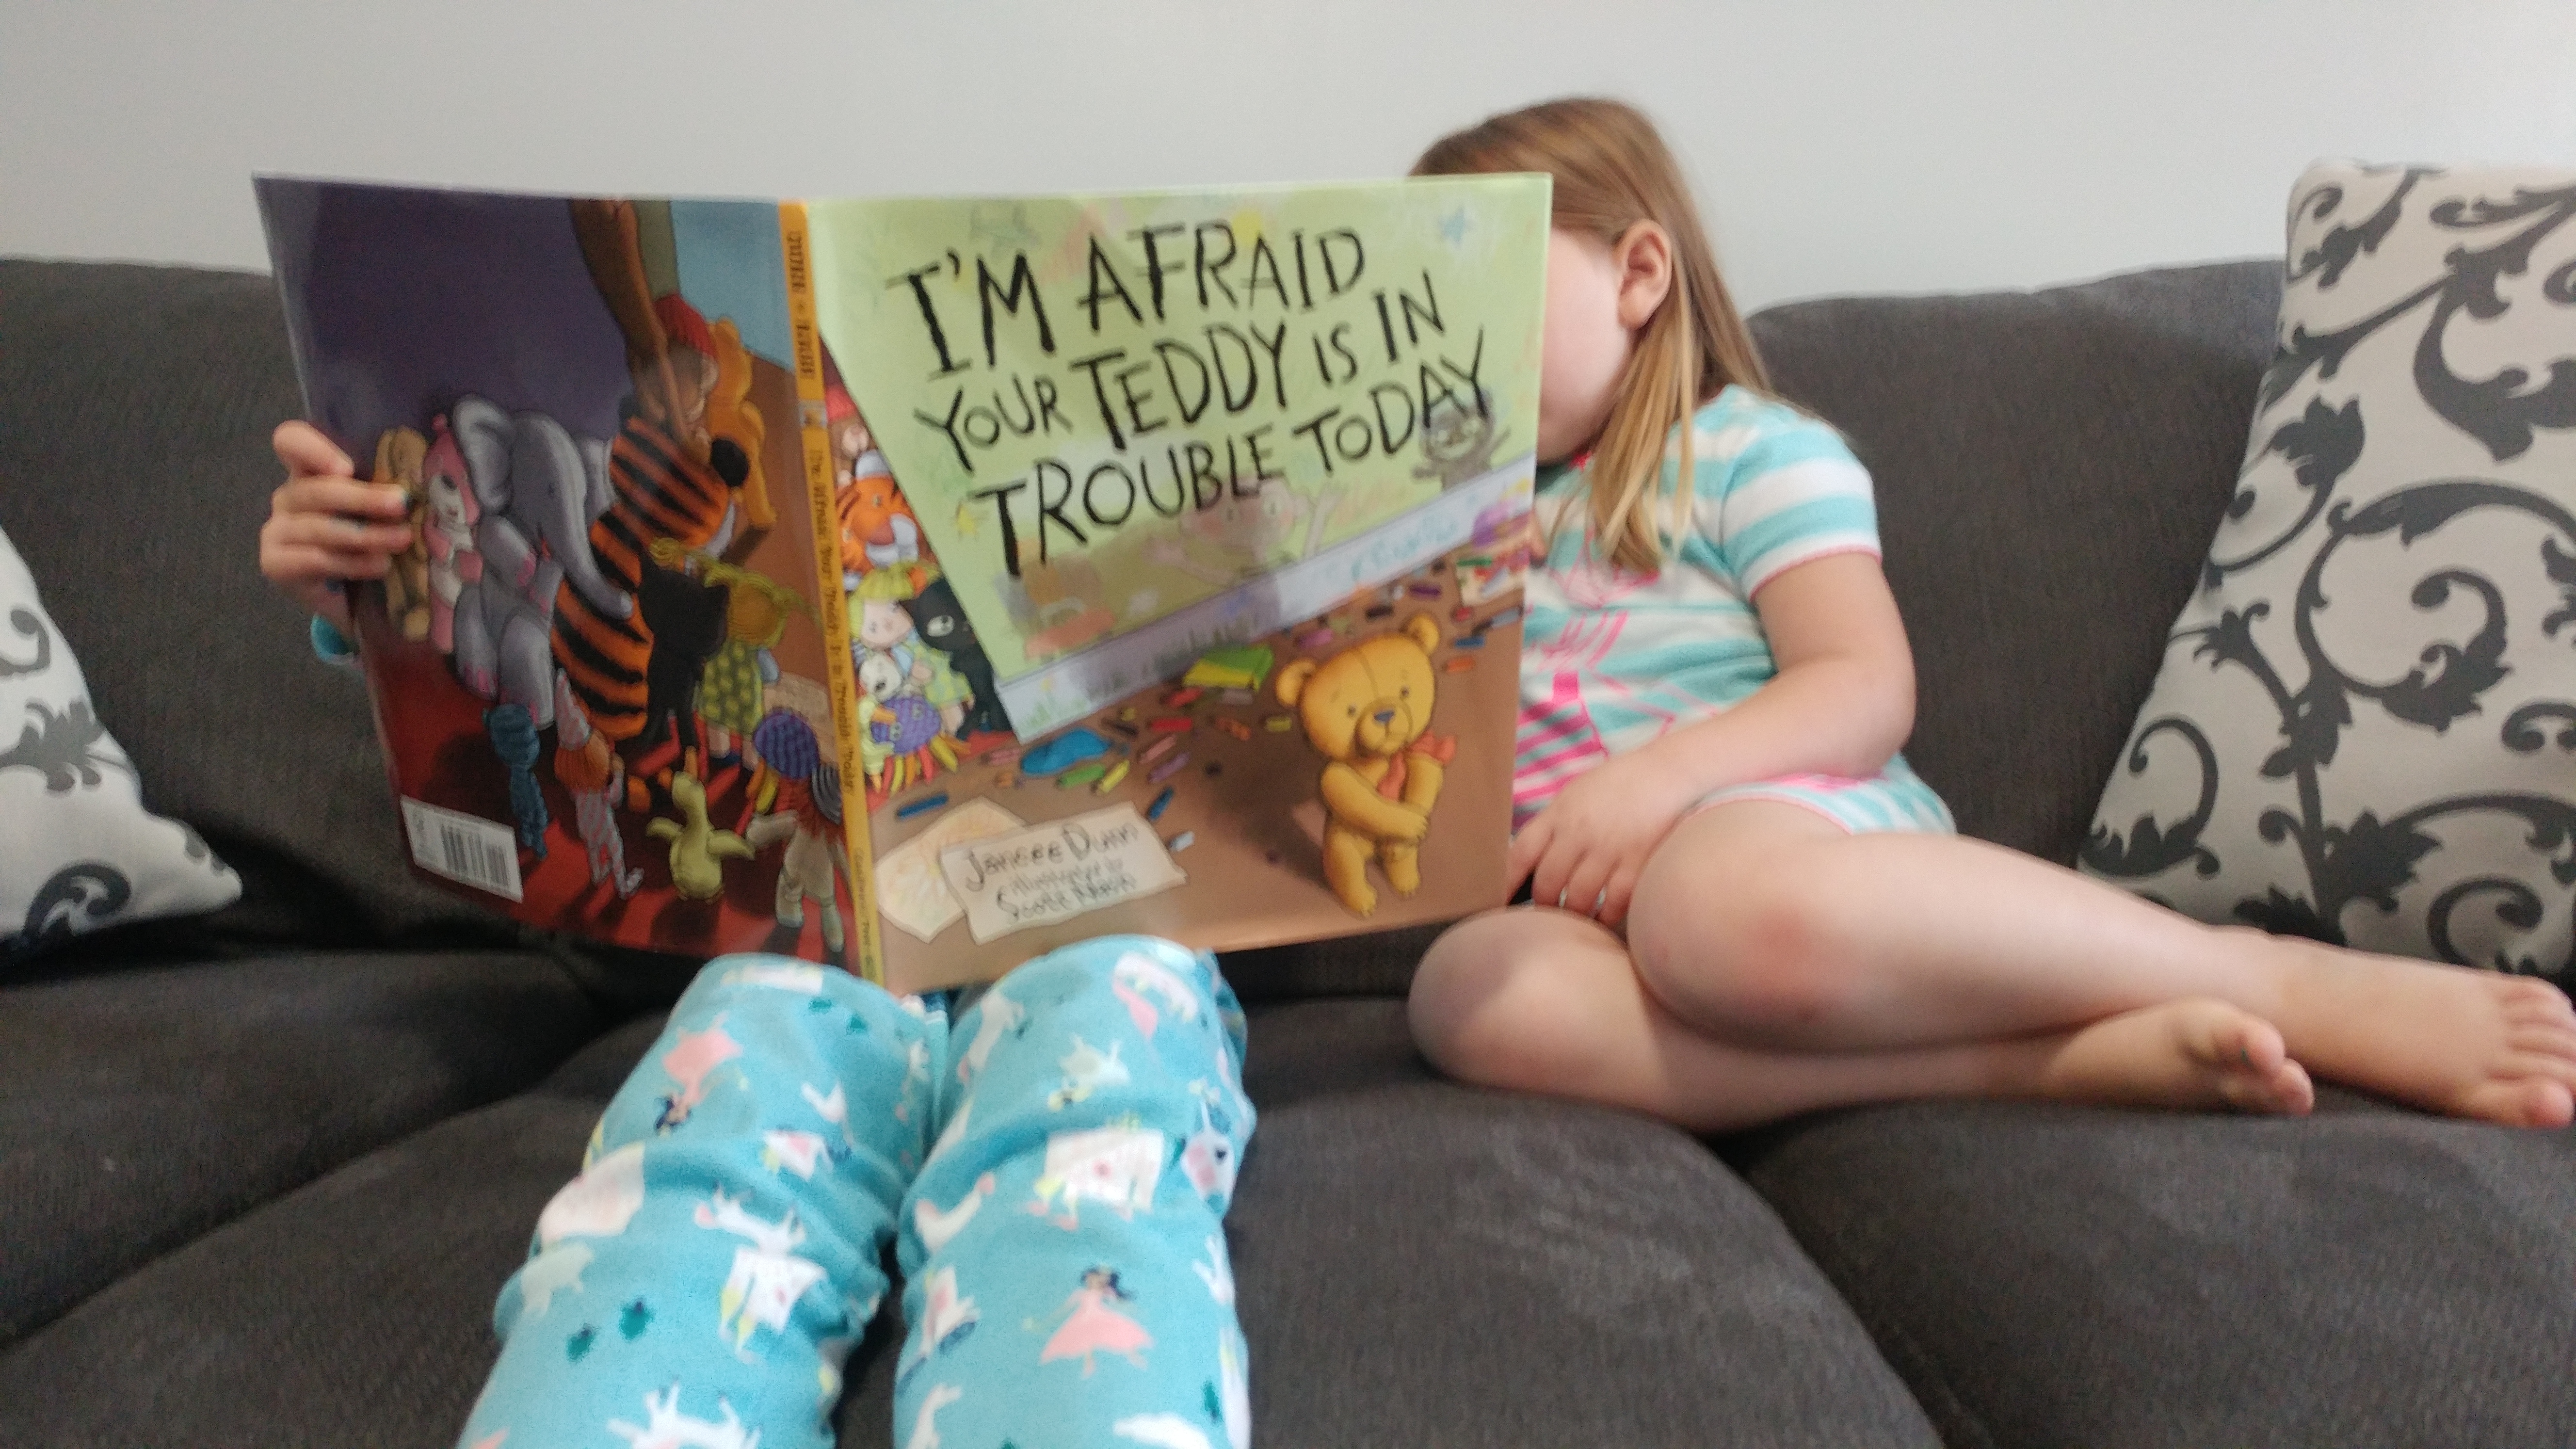 I'm Afraid Your Teddy is in Trouble Today Book Review